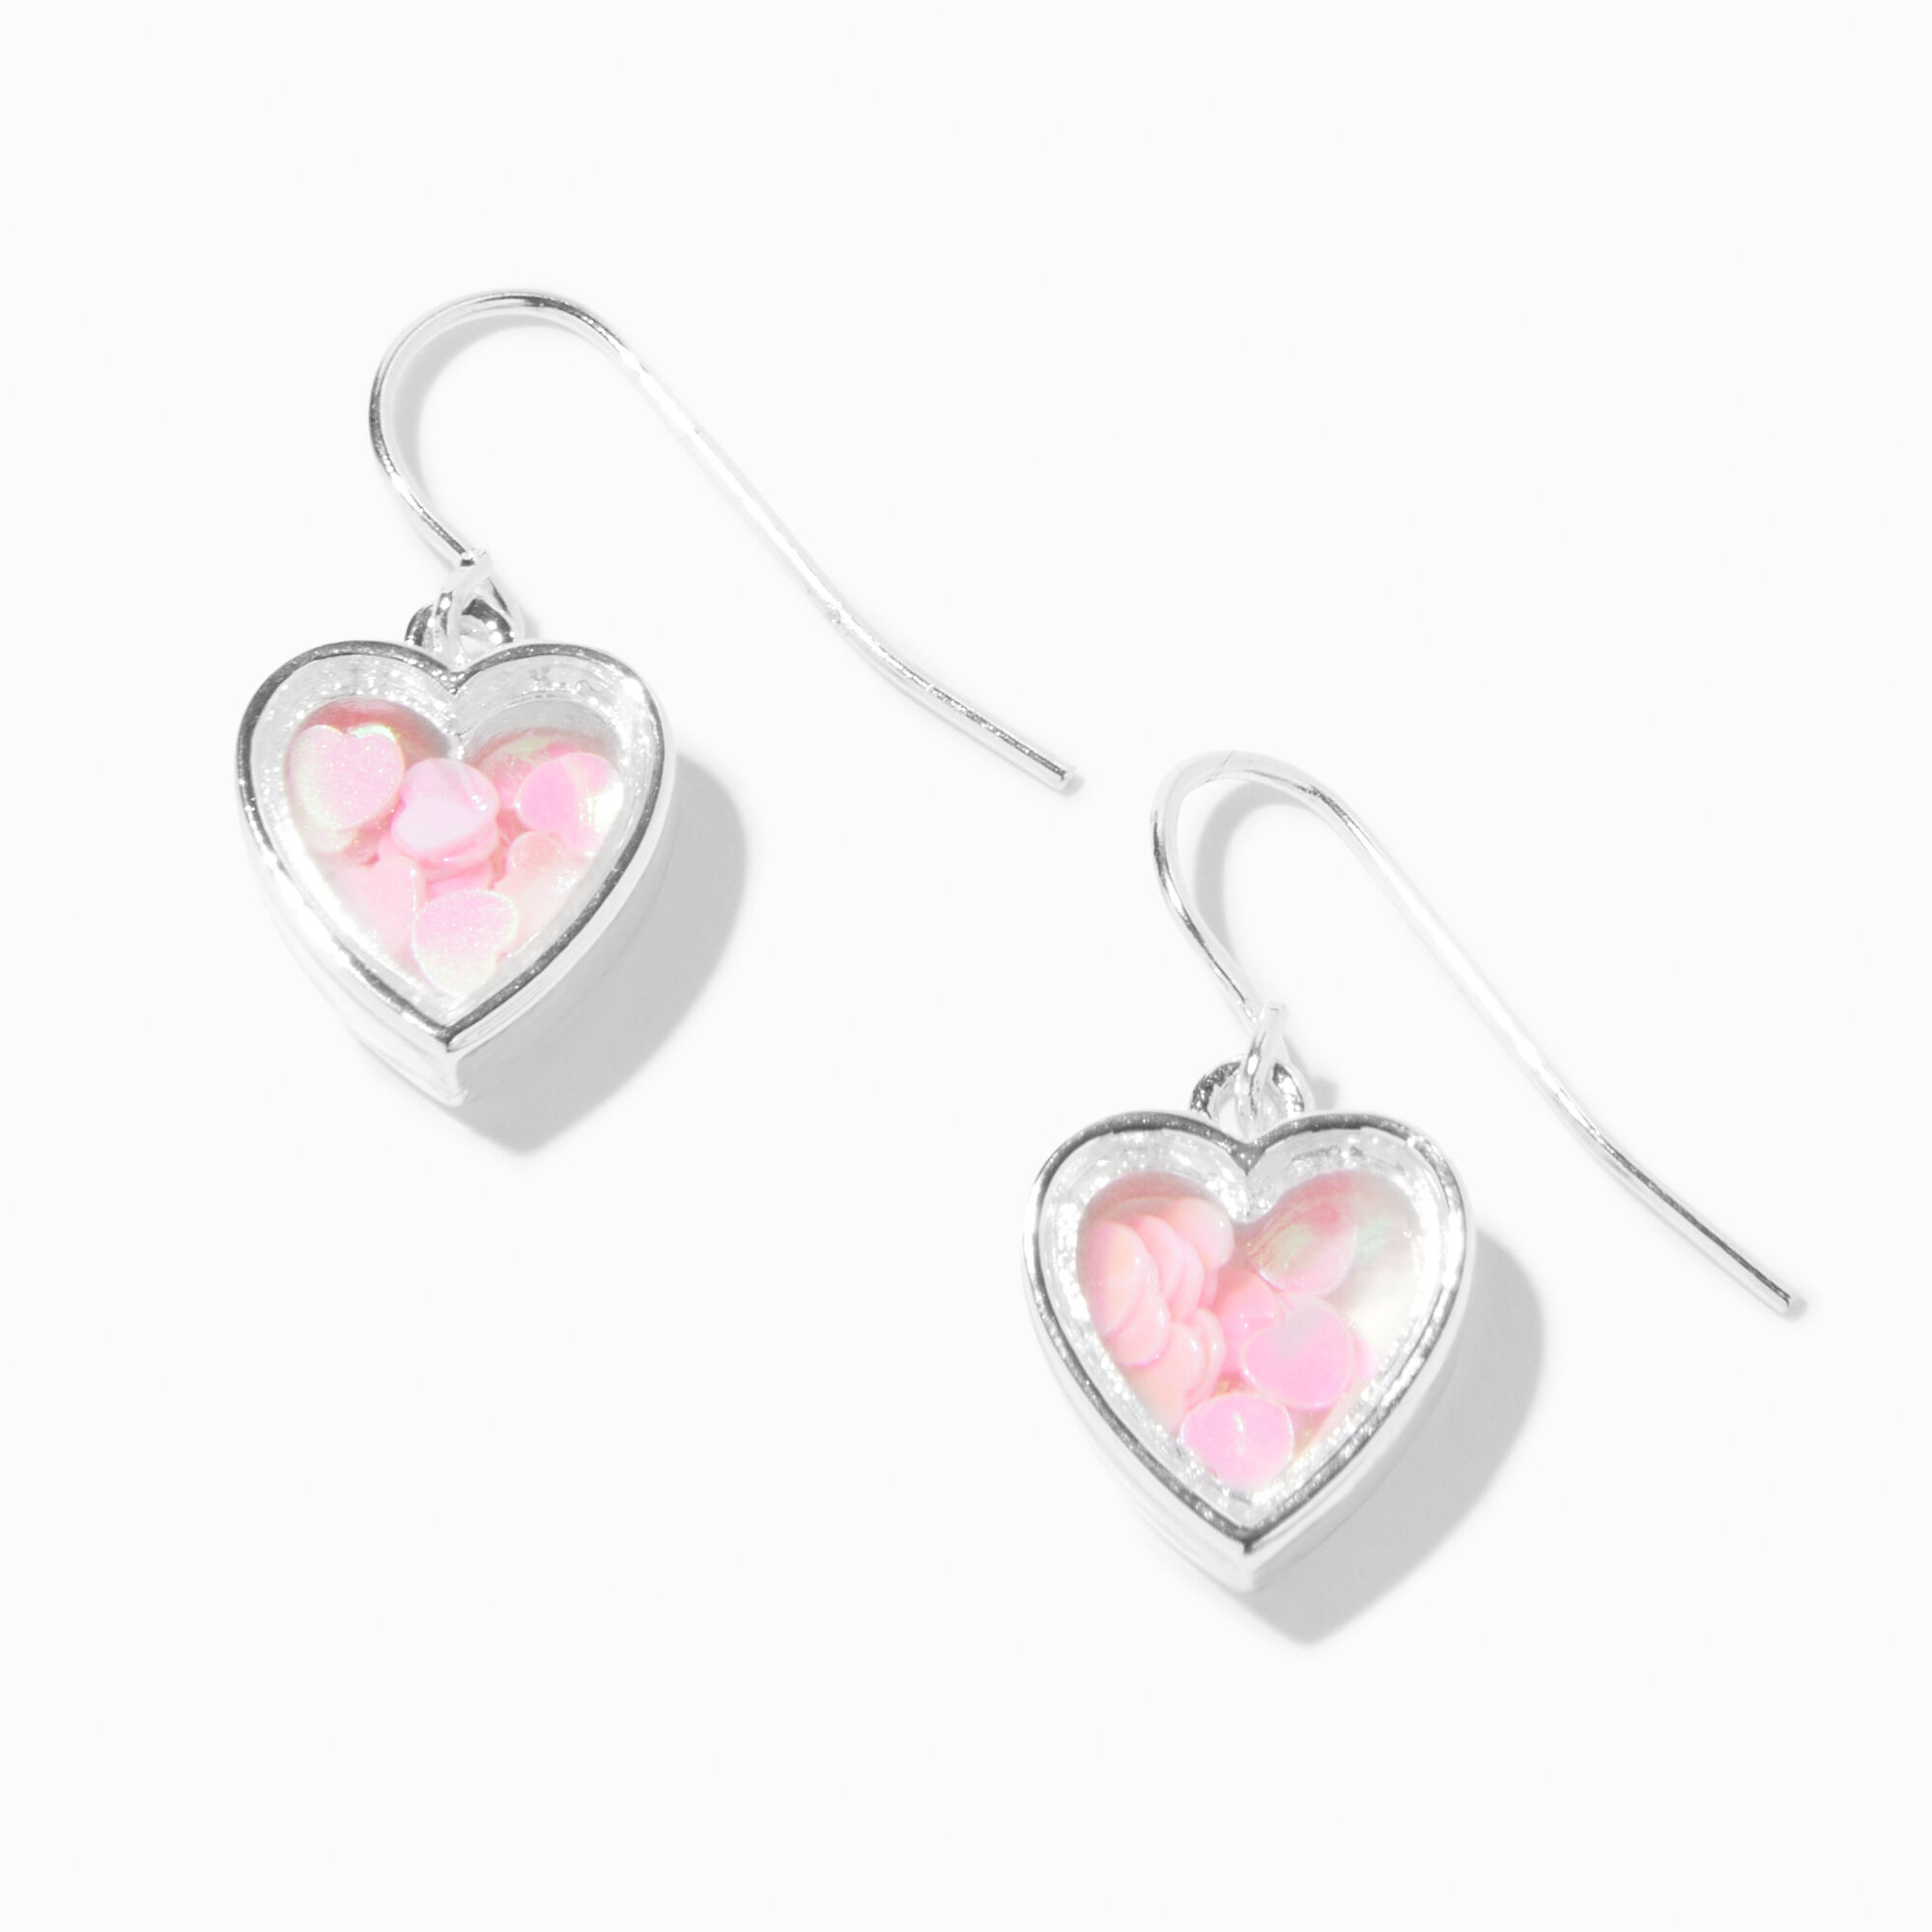 View Claires Heart Shaker SilverTone 05 Drop Earrings Pink information